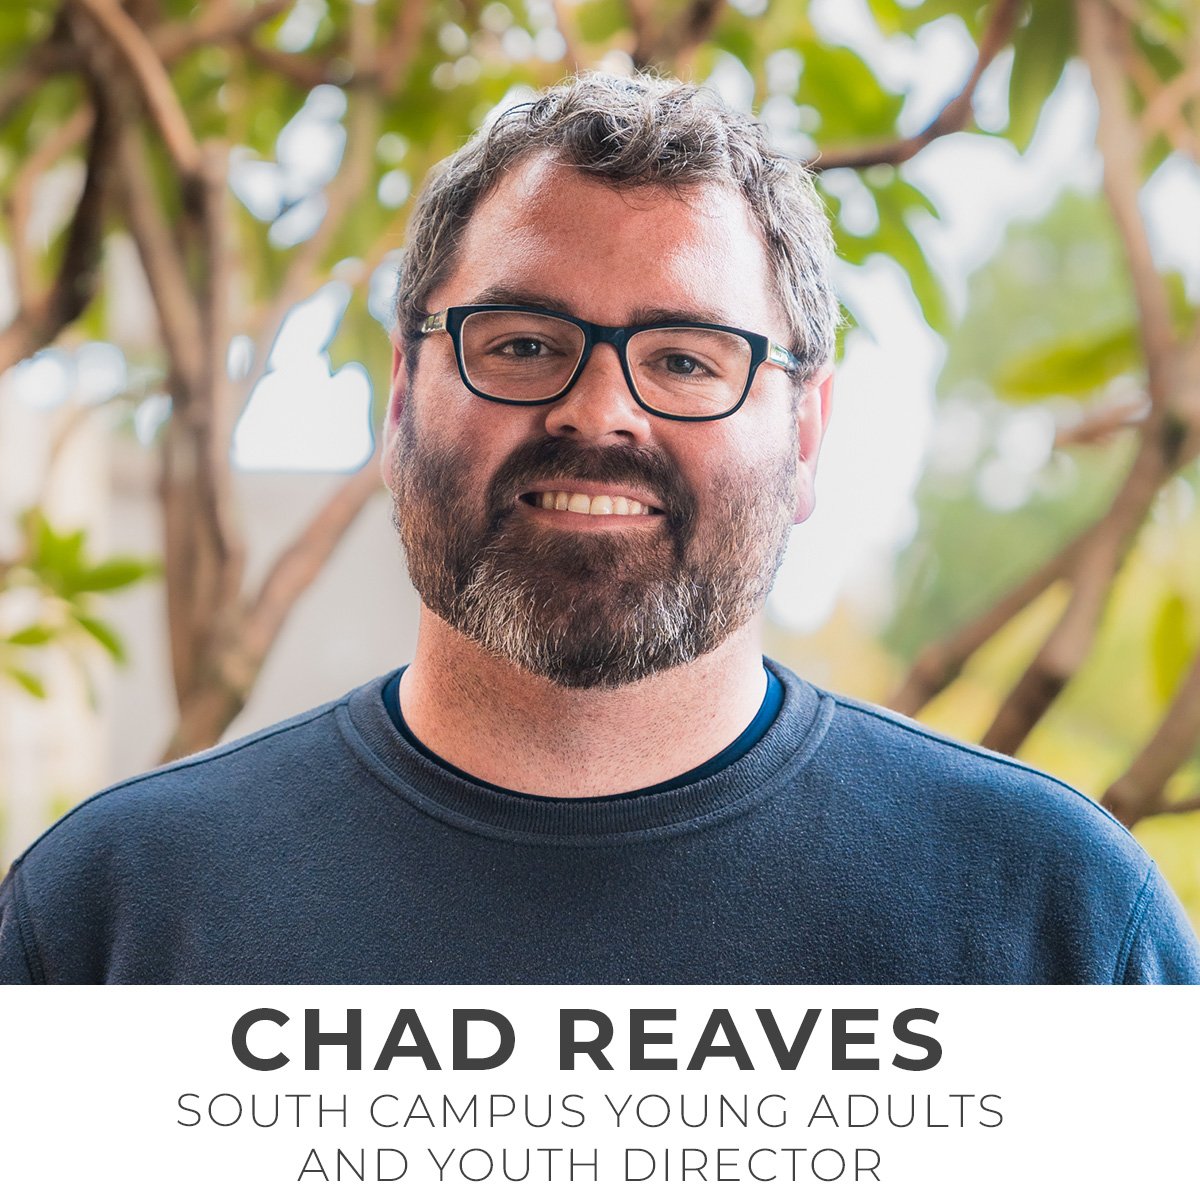 Chad Reaves, South Campus Youth and Young Adults Director